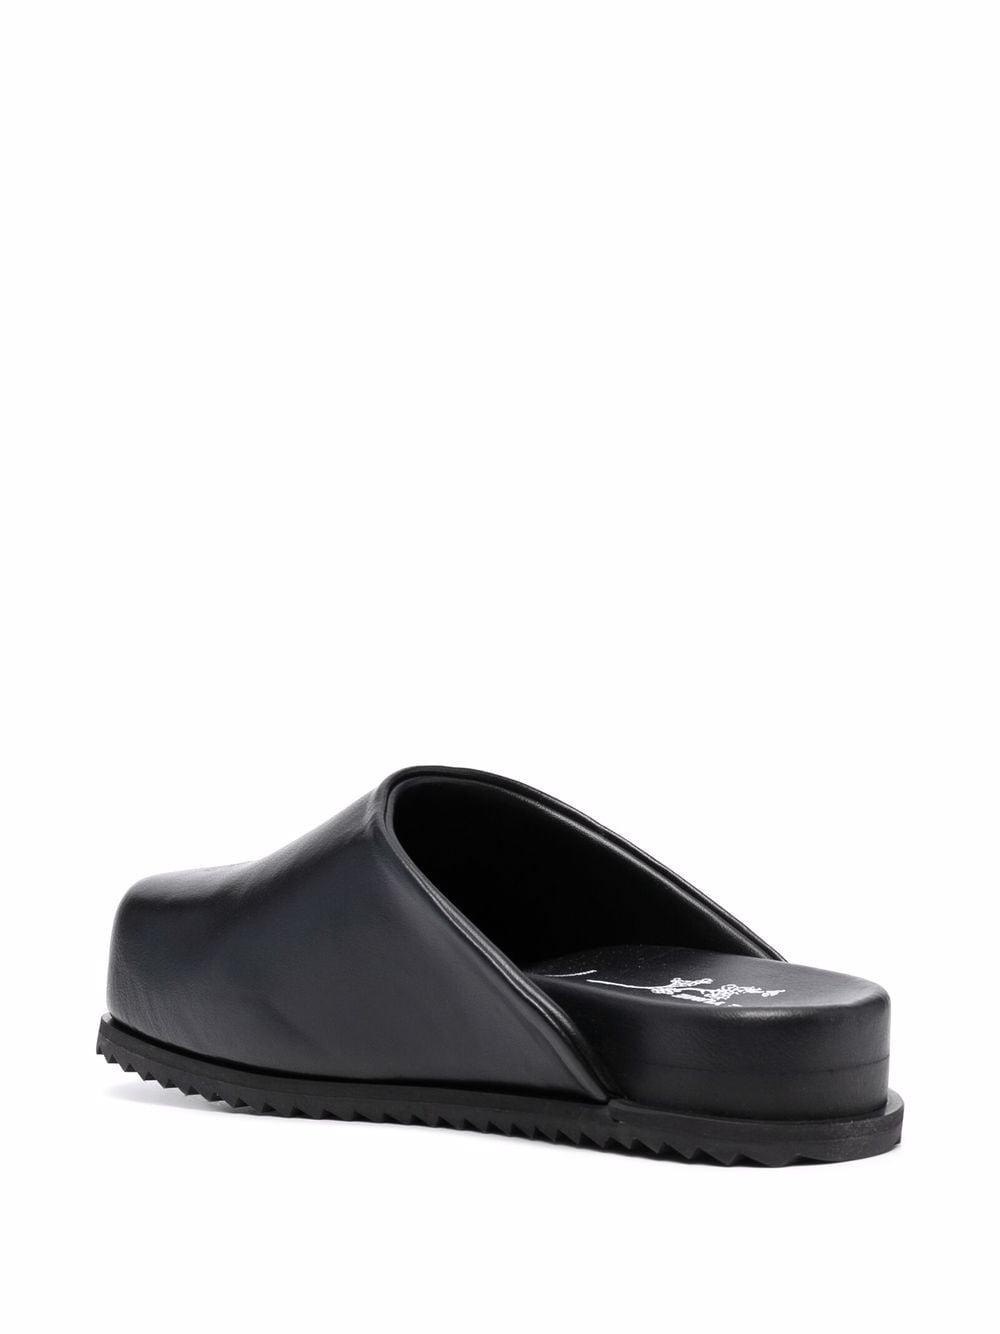 Yume Yume Leather Ciabatta Truck Shoes in Black | Lyst